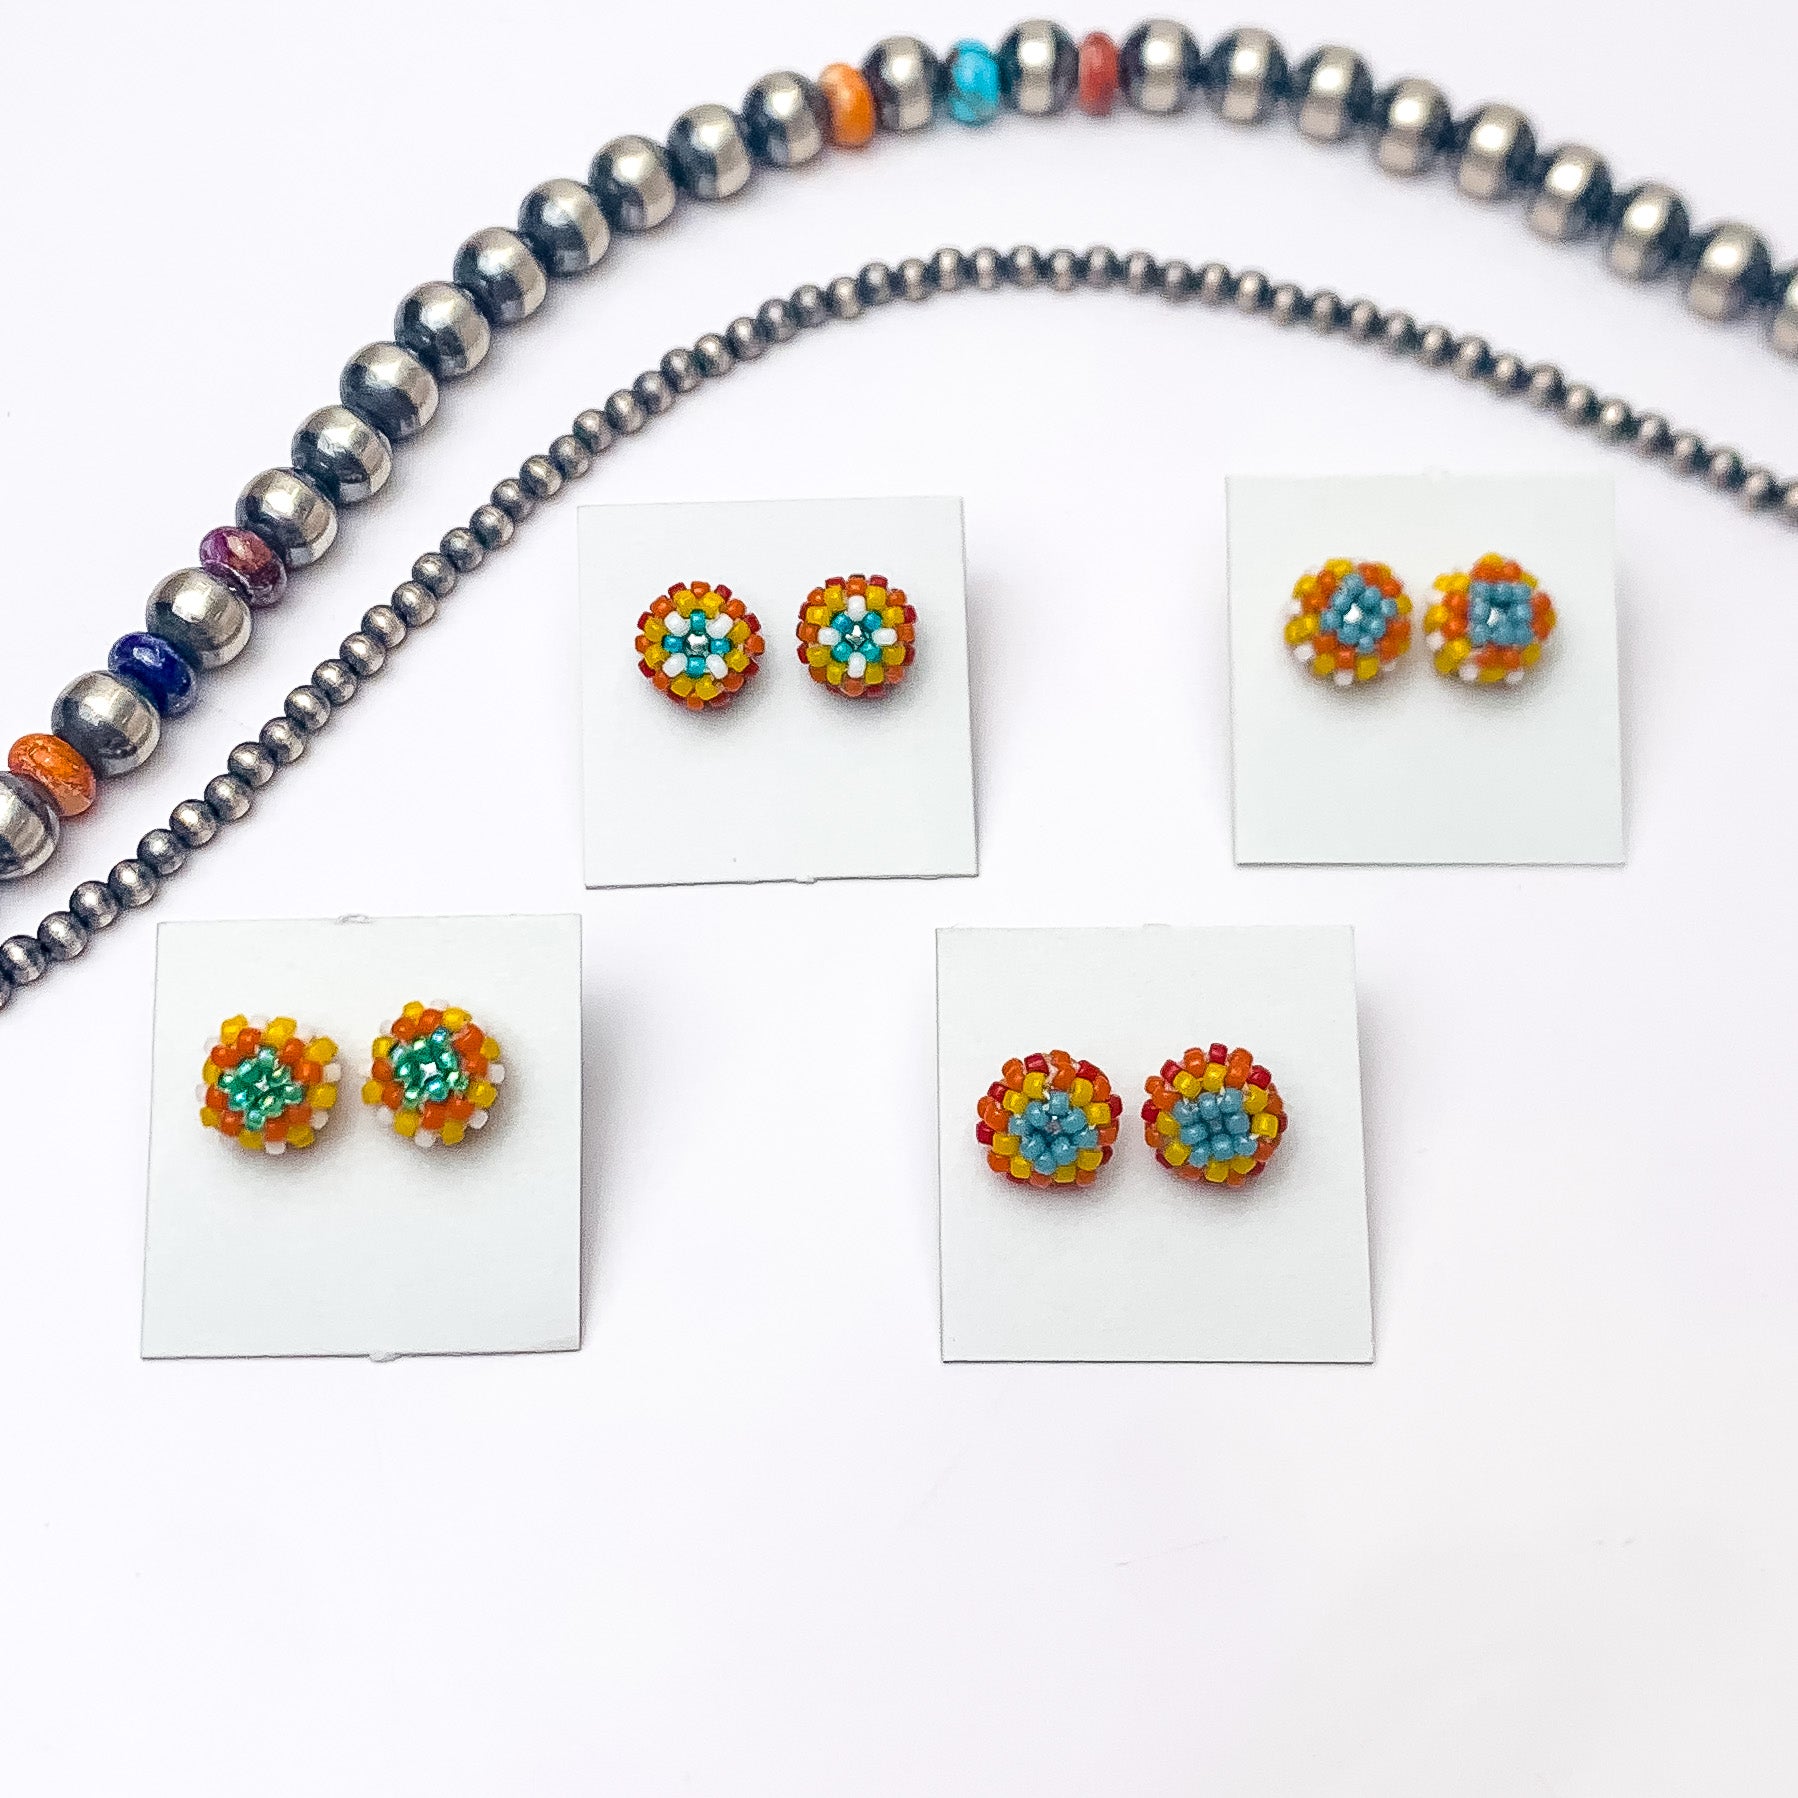 Pictured are four pairs of circle, beaded stud earrings in a mix of orange and blue beads that are different in each pair. These earrings are pictured on a white background with silver beads above the studs. 